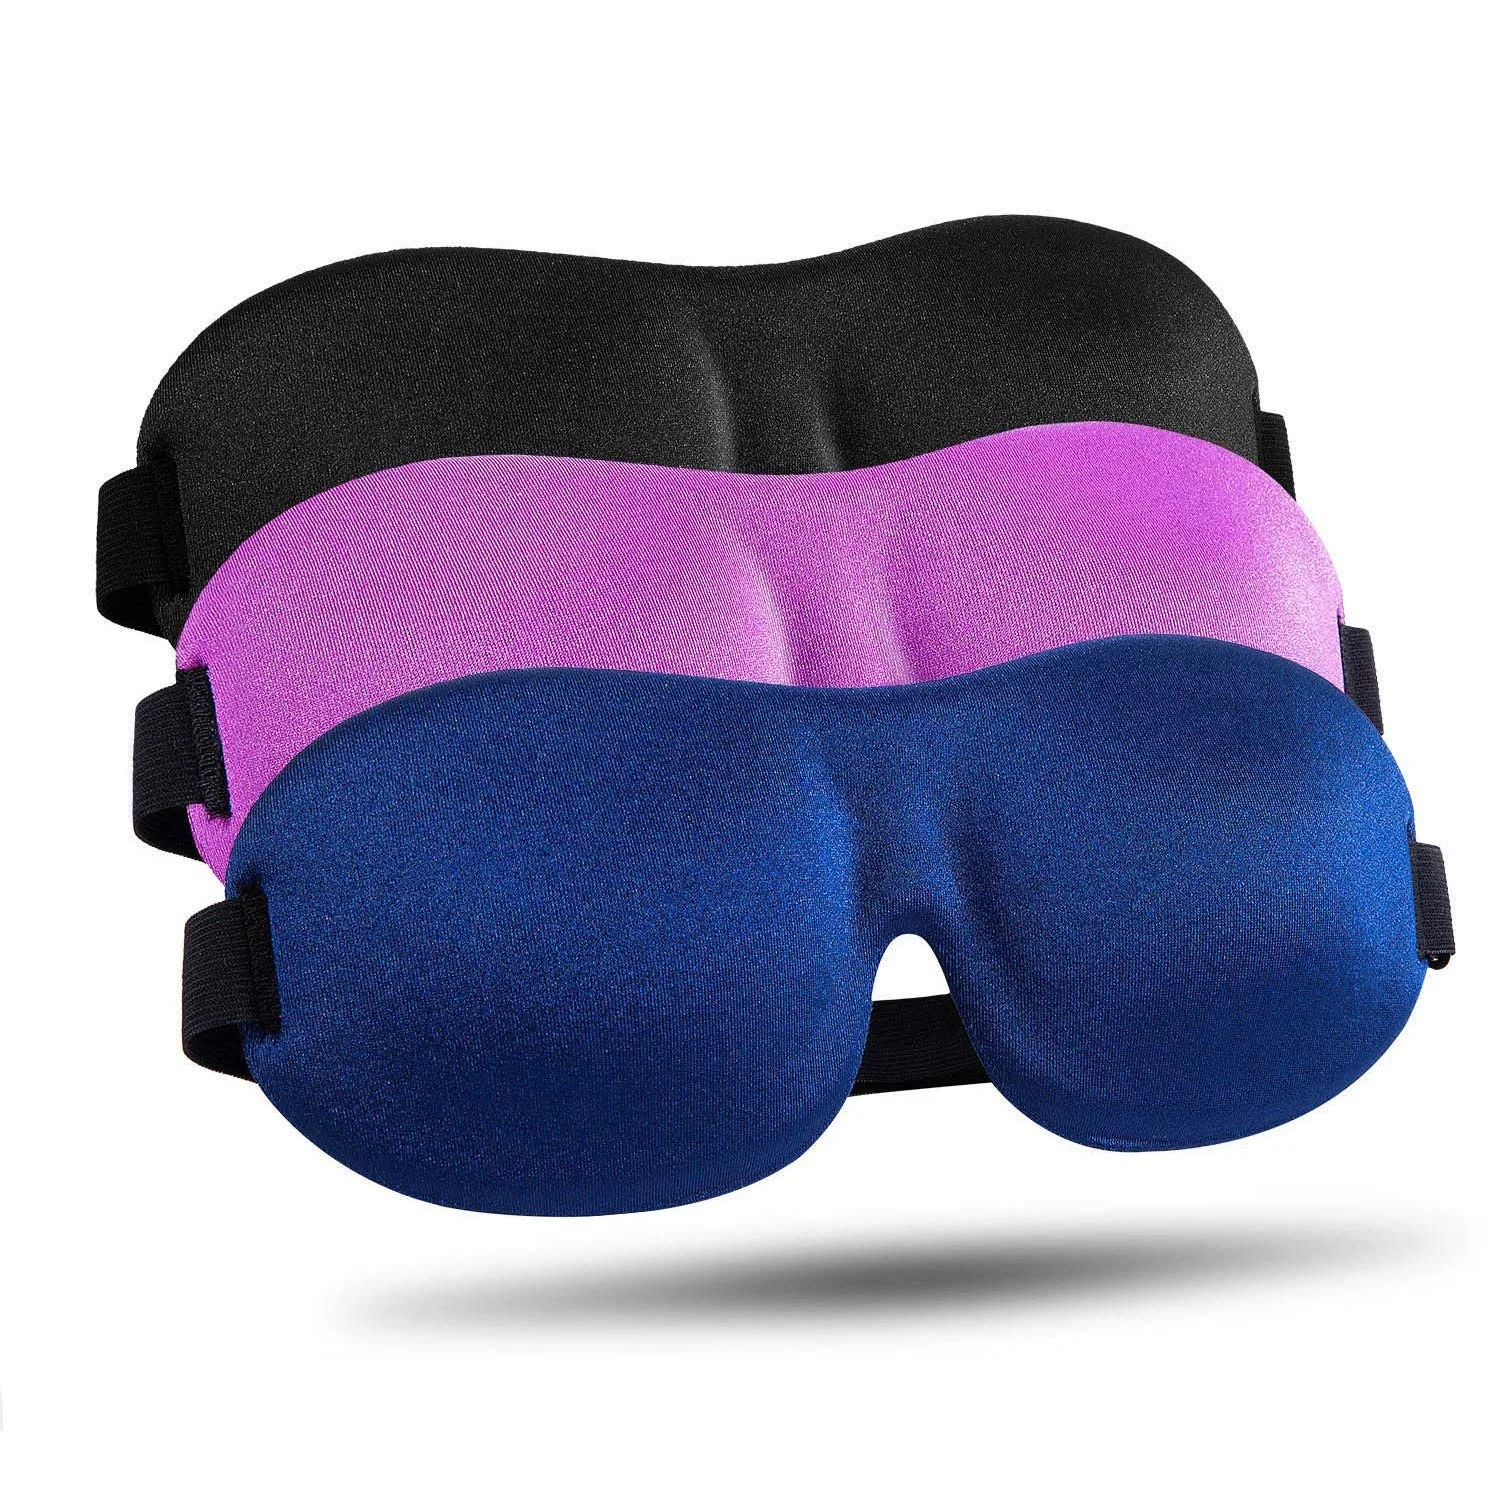 

No Pressure Seamless Stereo 3D Contoured 100% Blackout Eye Mask for Sleeping with Adjustable Strap Y01